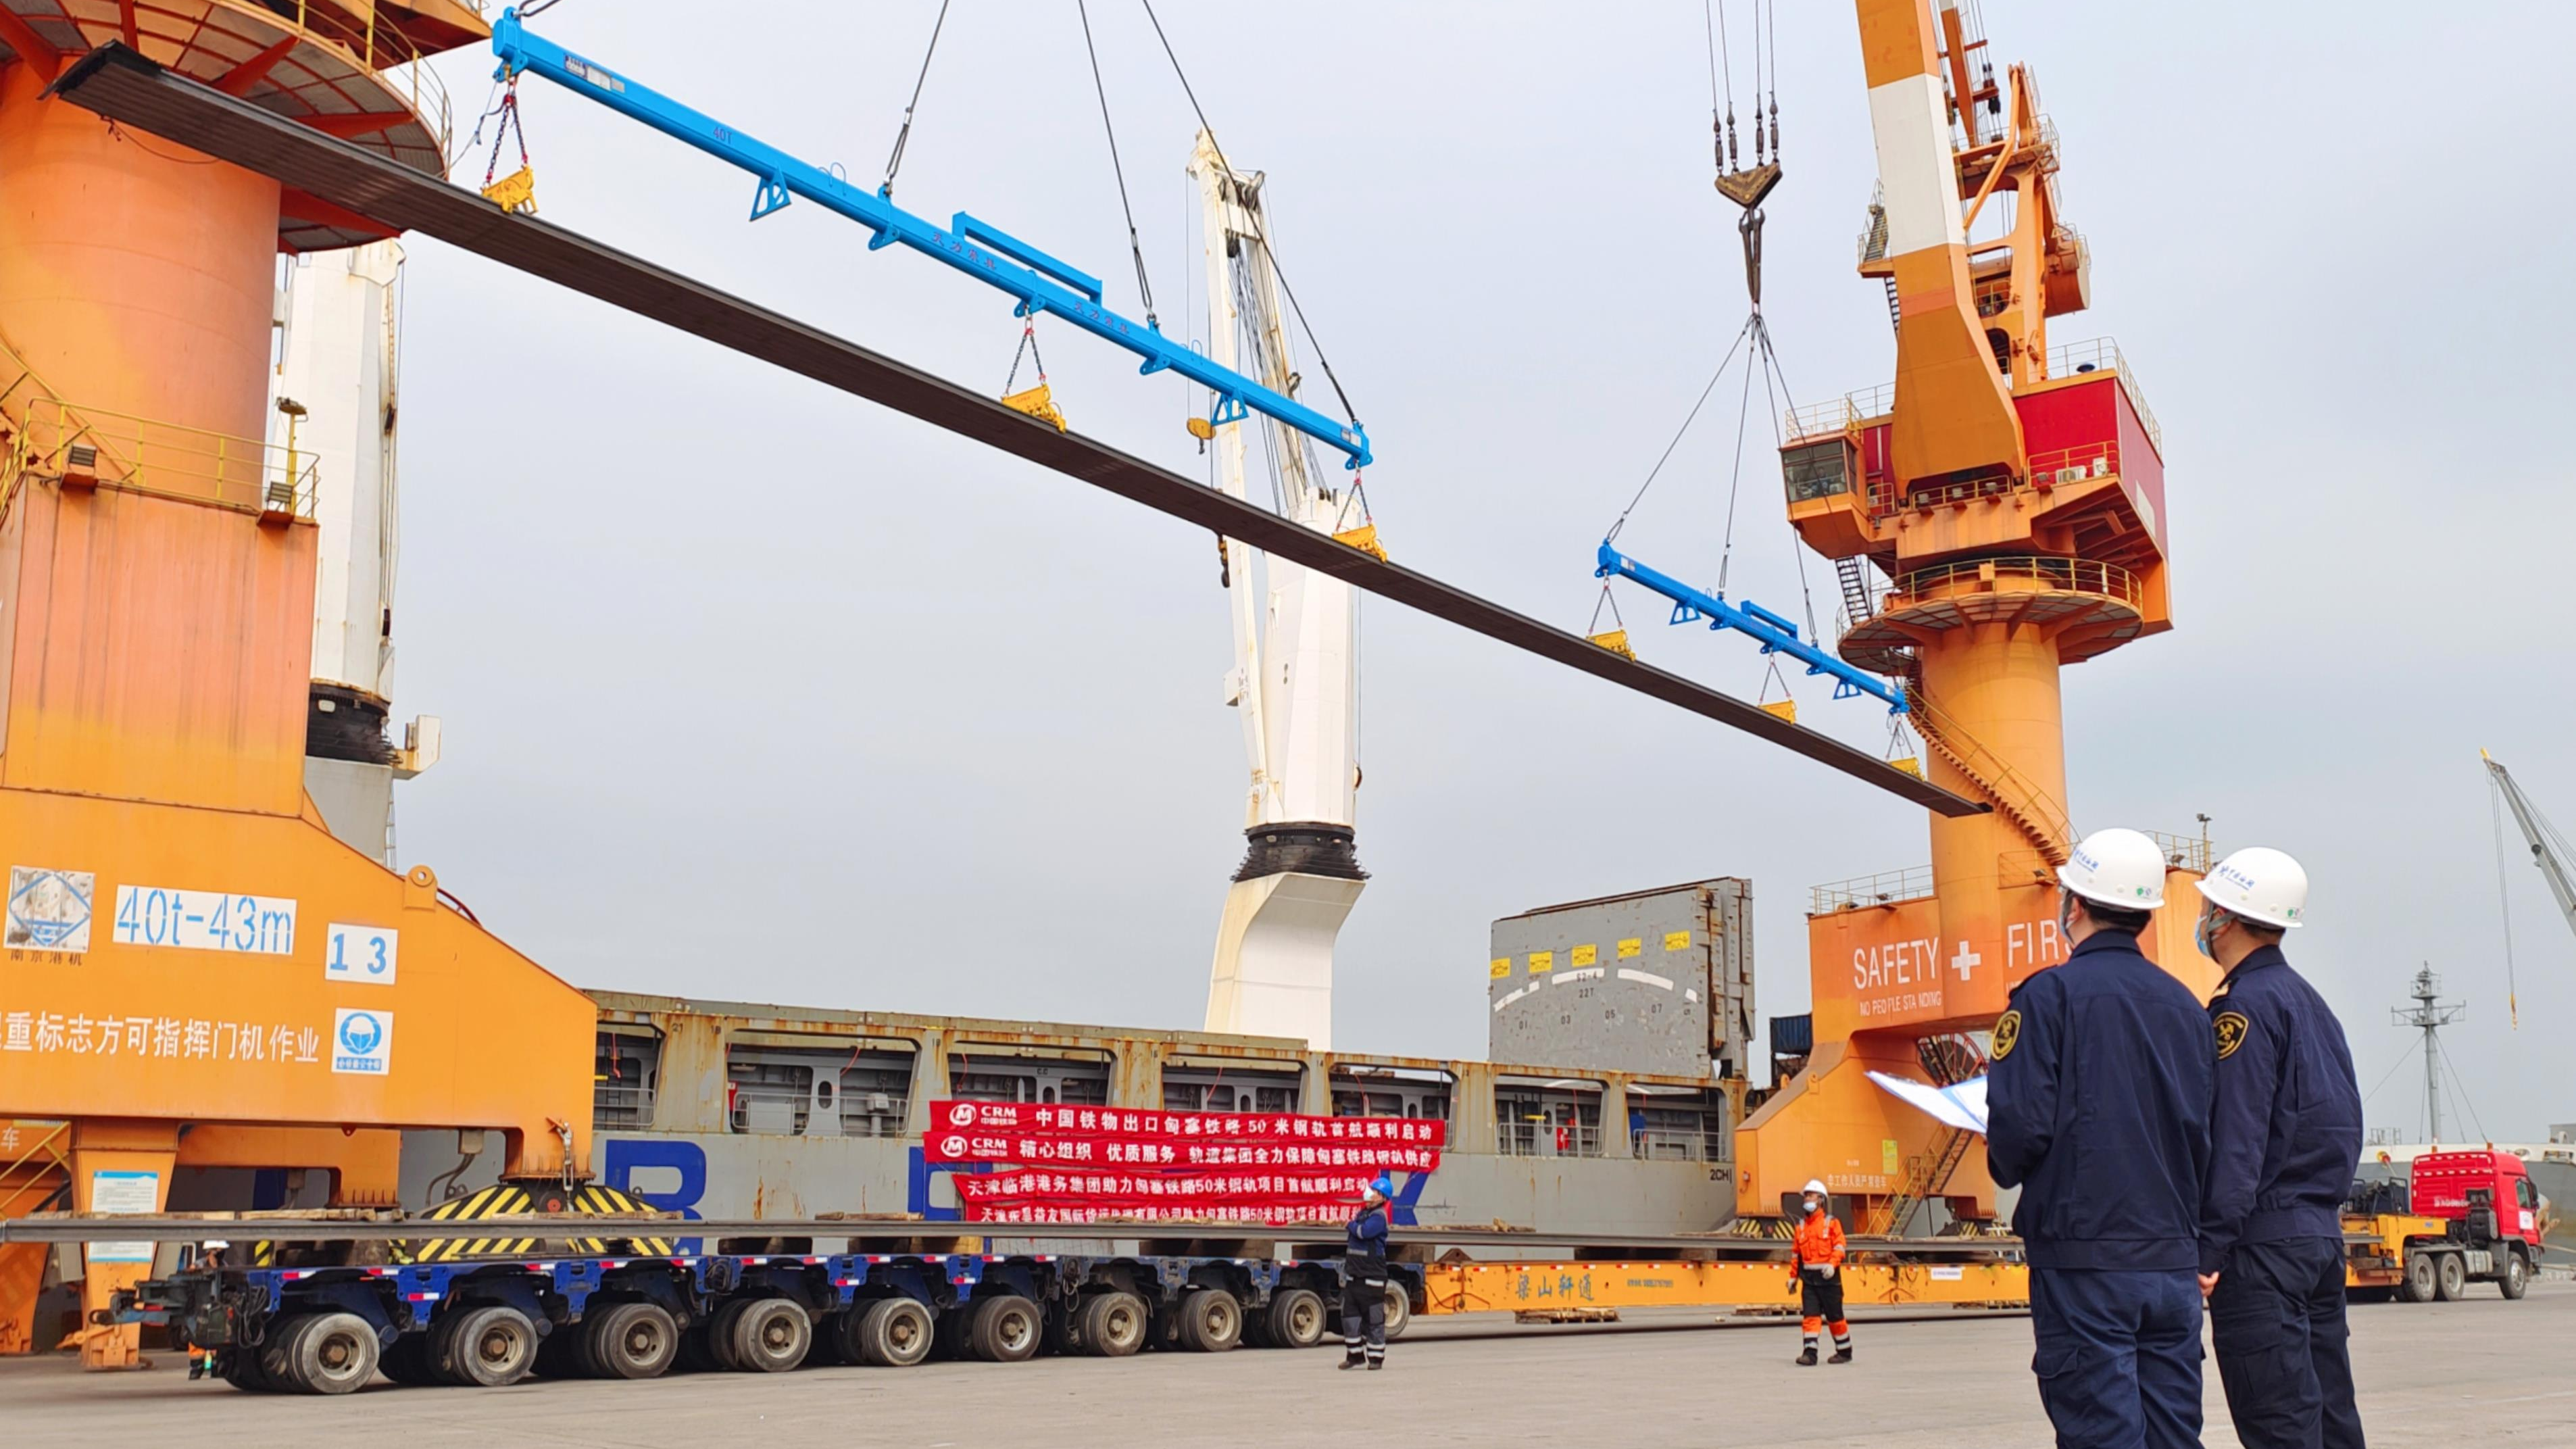 The first batch of 6,500 tonnes of Chinese-made 50-meter steel rails departs China's Tianjin Port for Serbia in Europe, March 21, 2023. /China Media Group